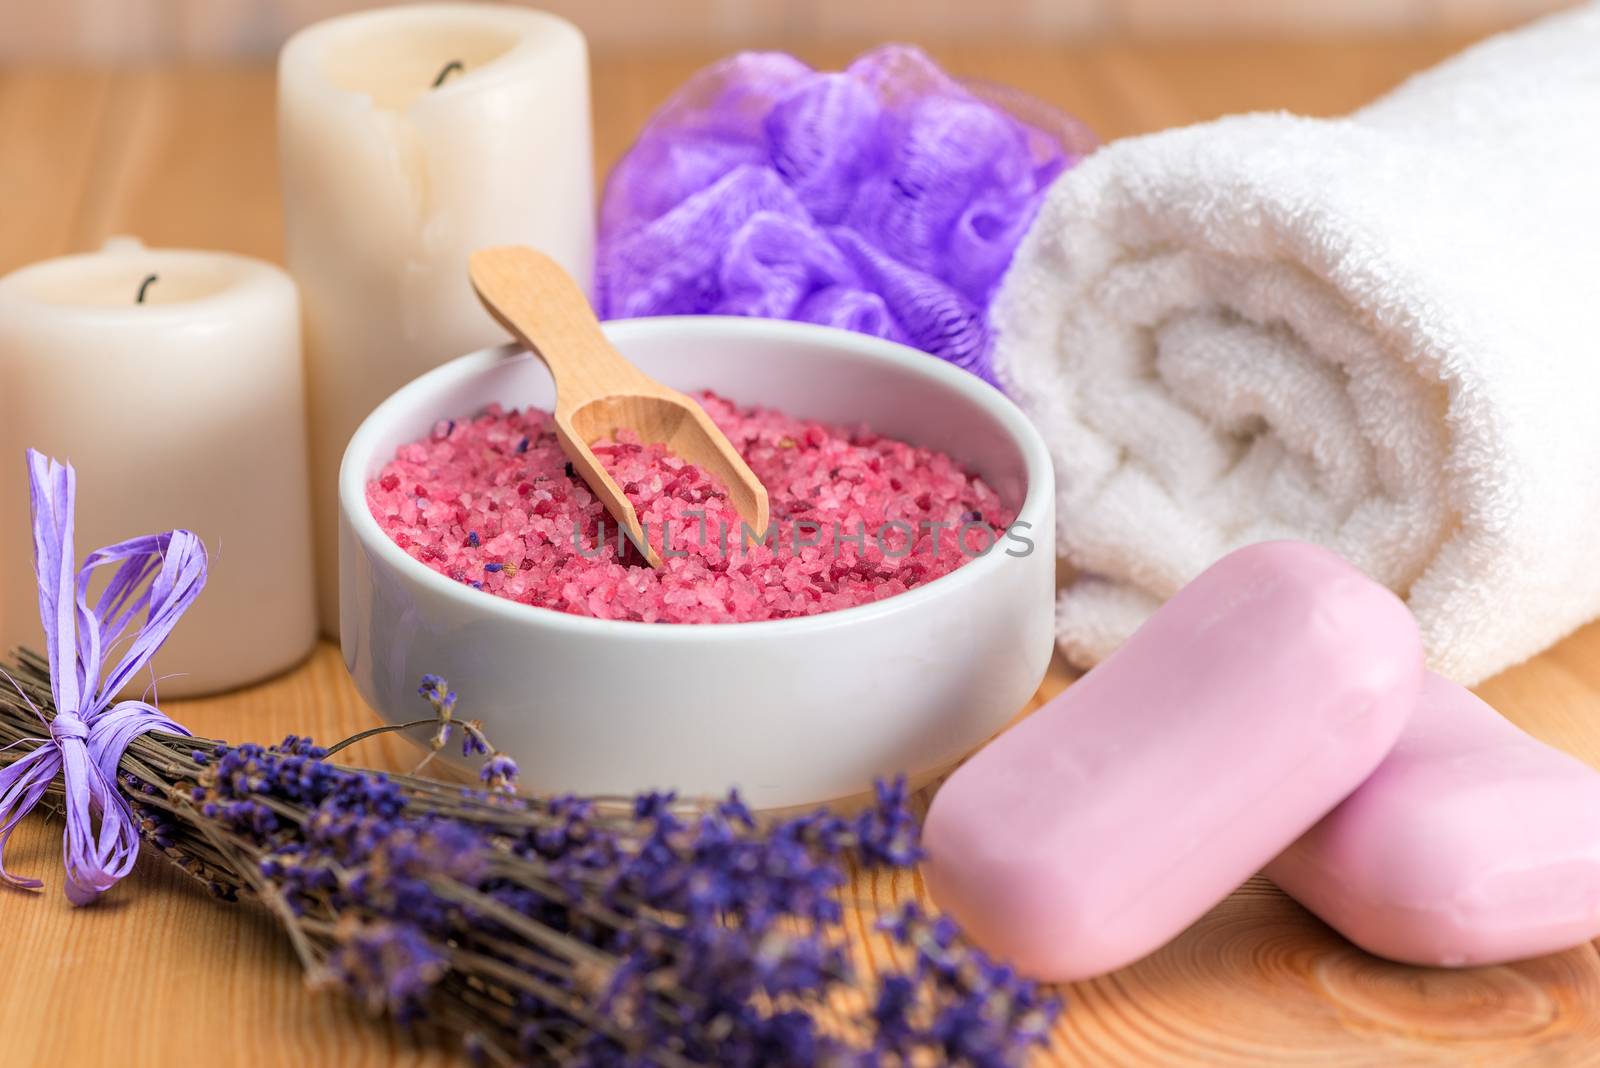 lavender cosmetics for spa treatments and relaxation close-ups